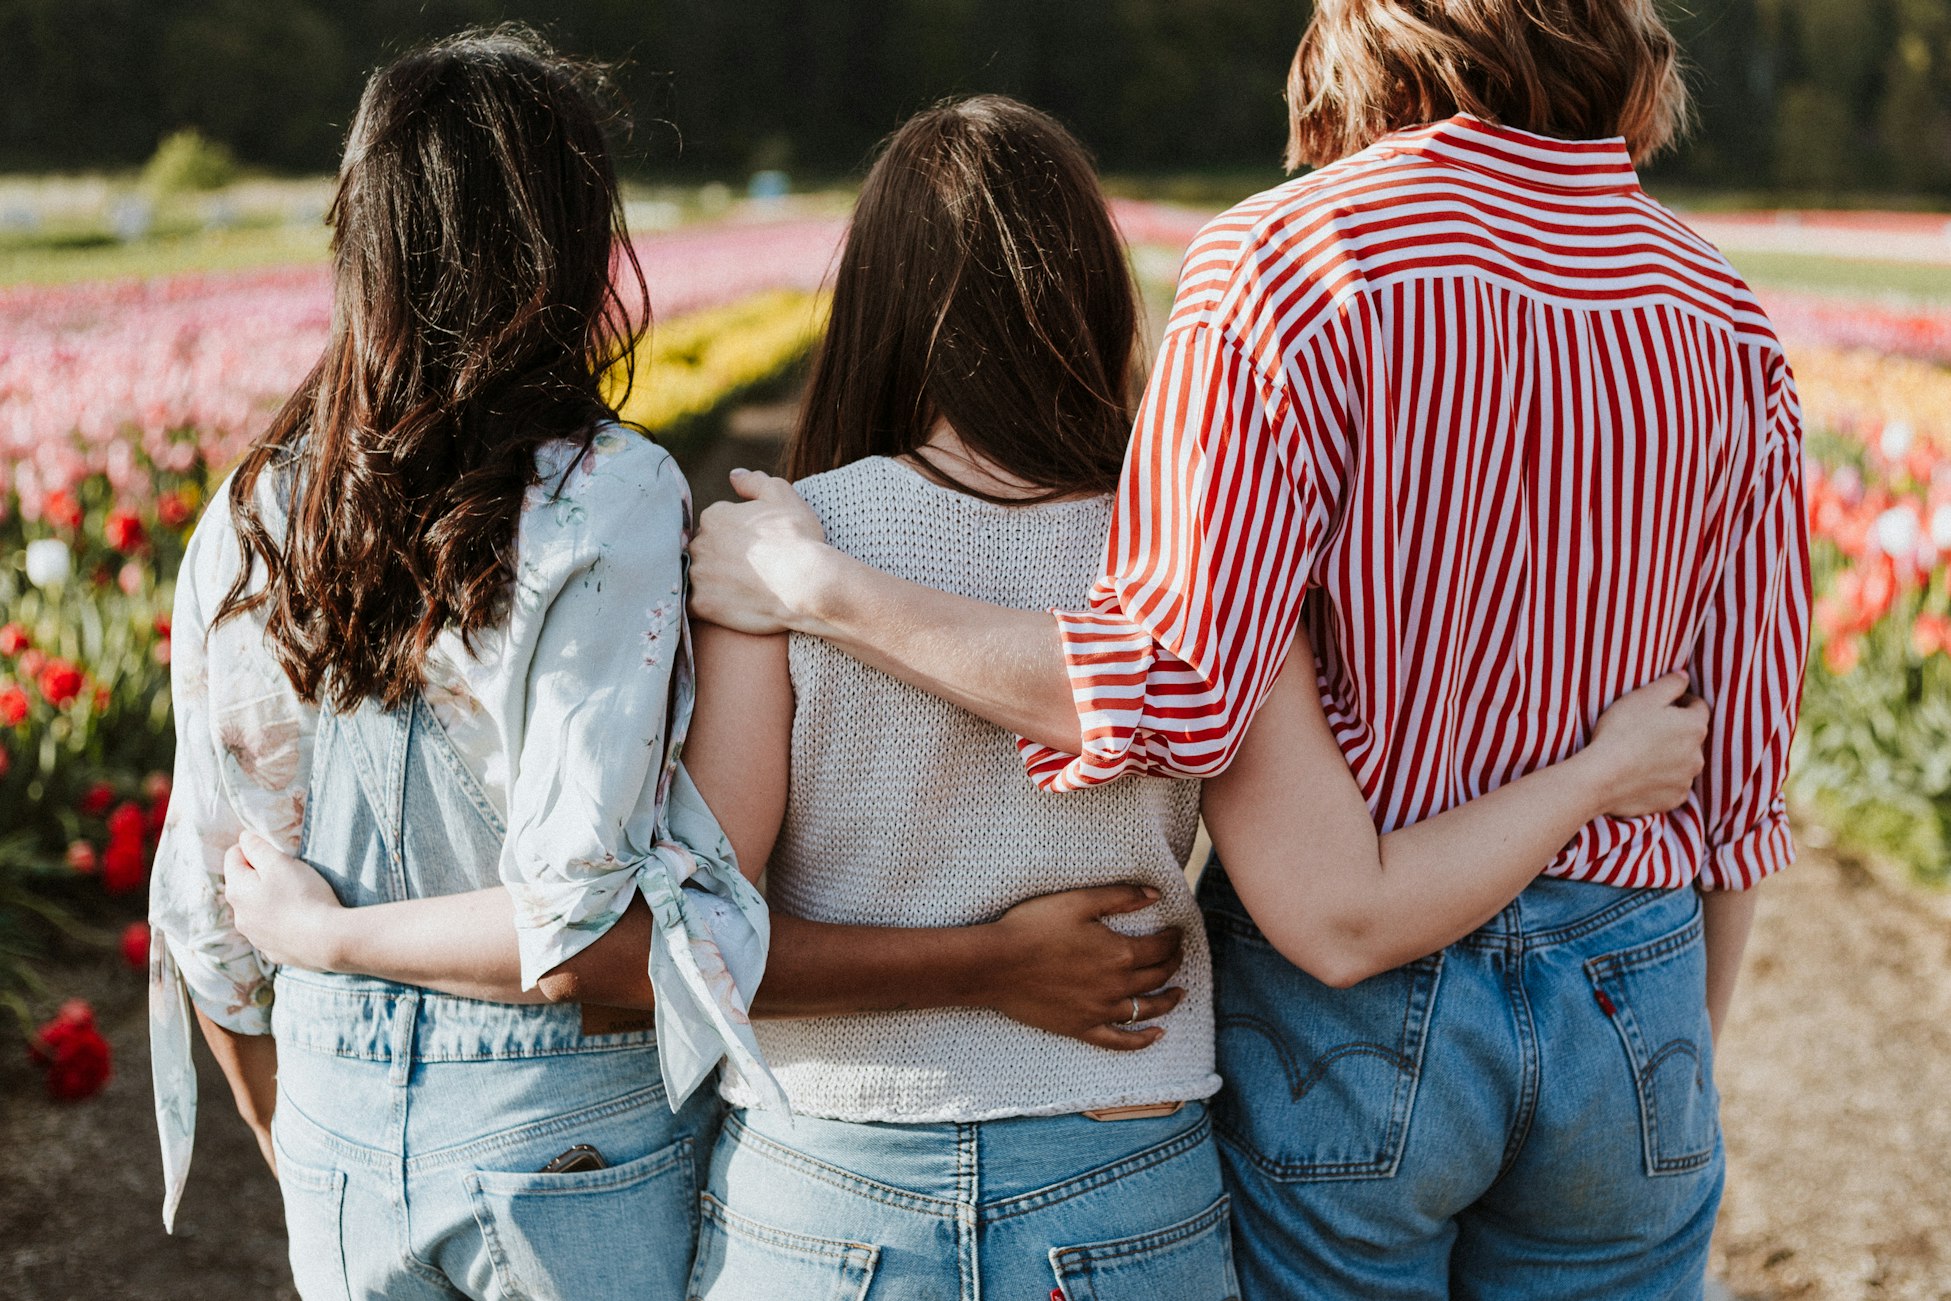 Three women with their arms around each other